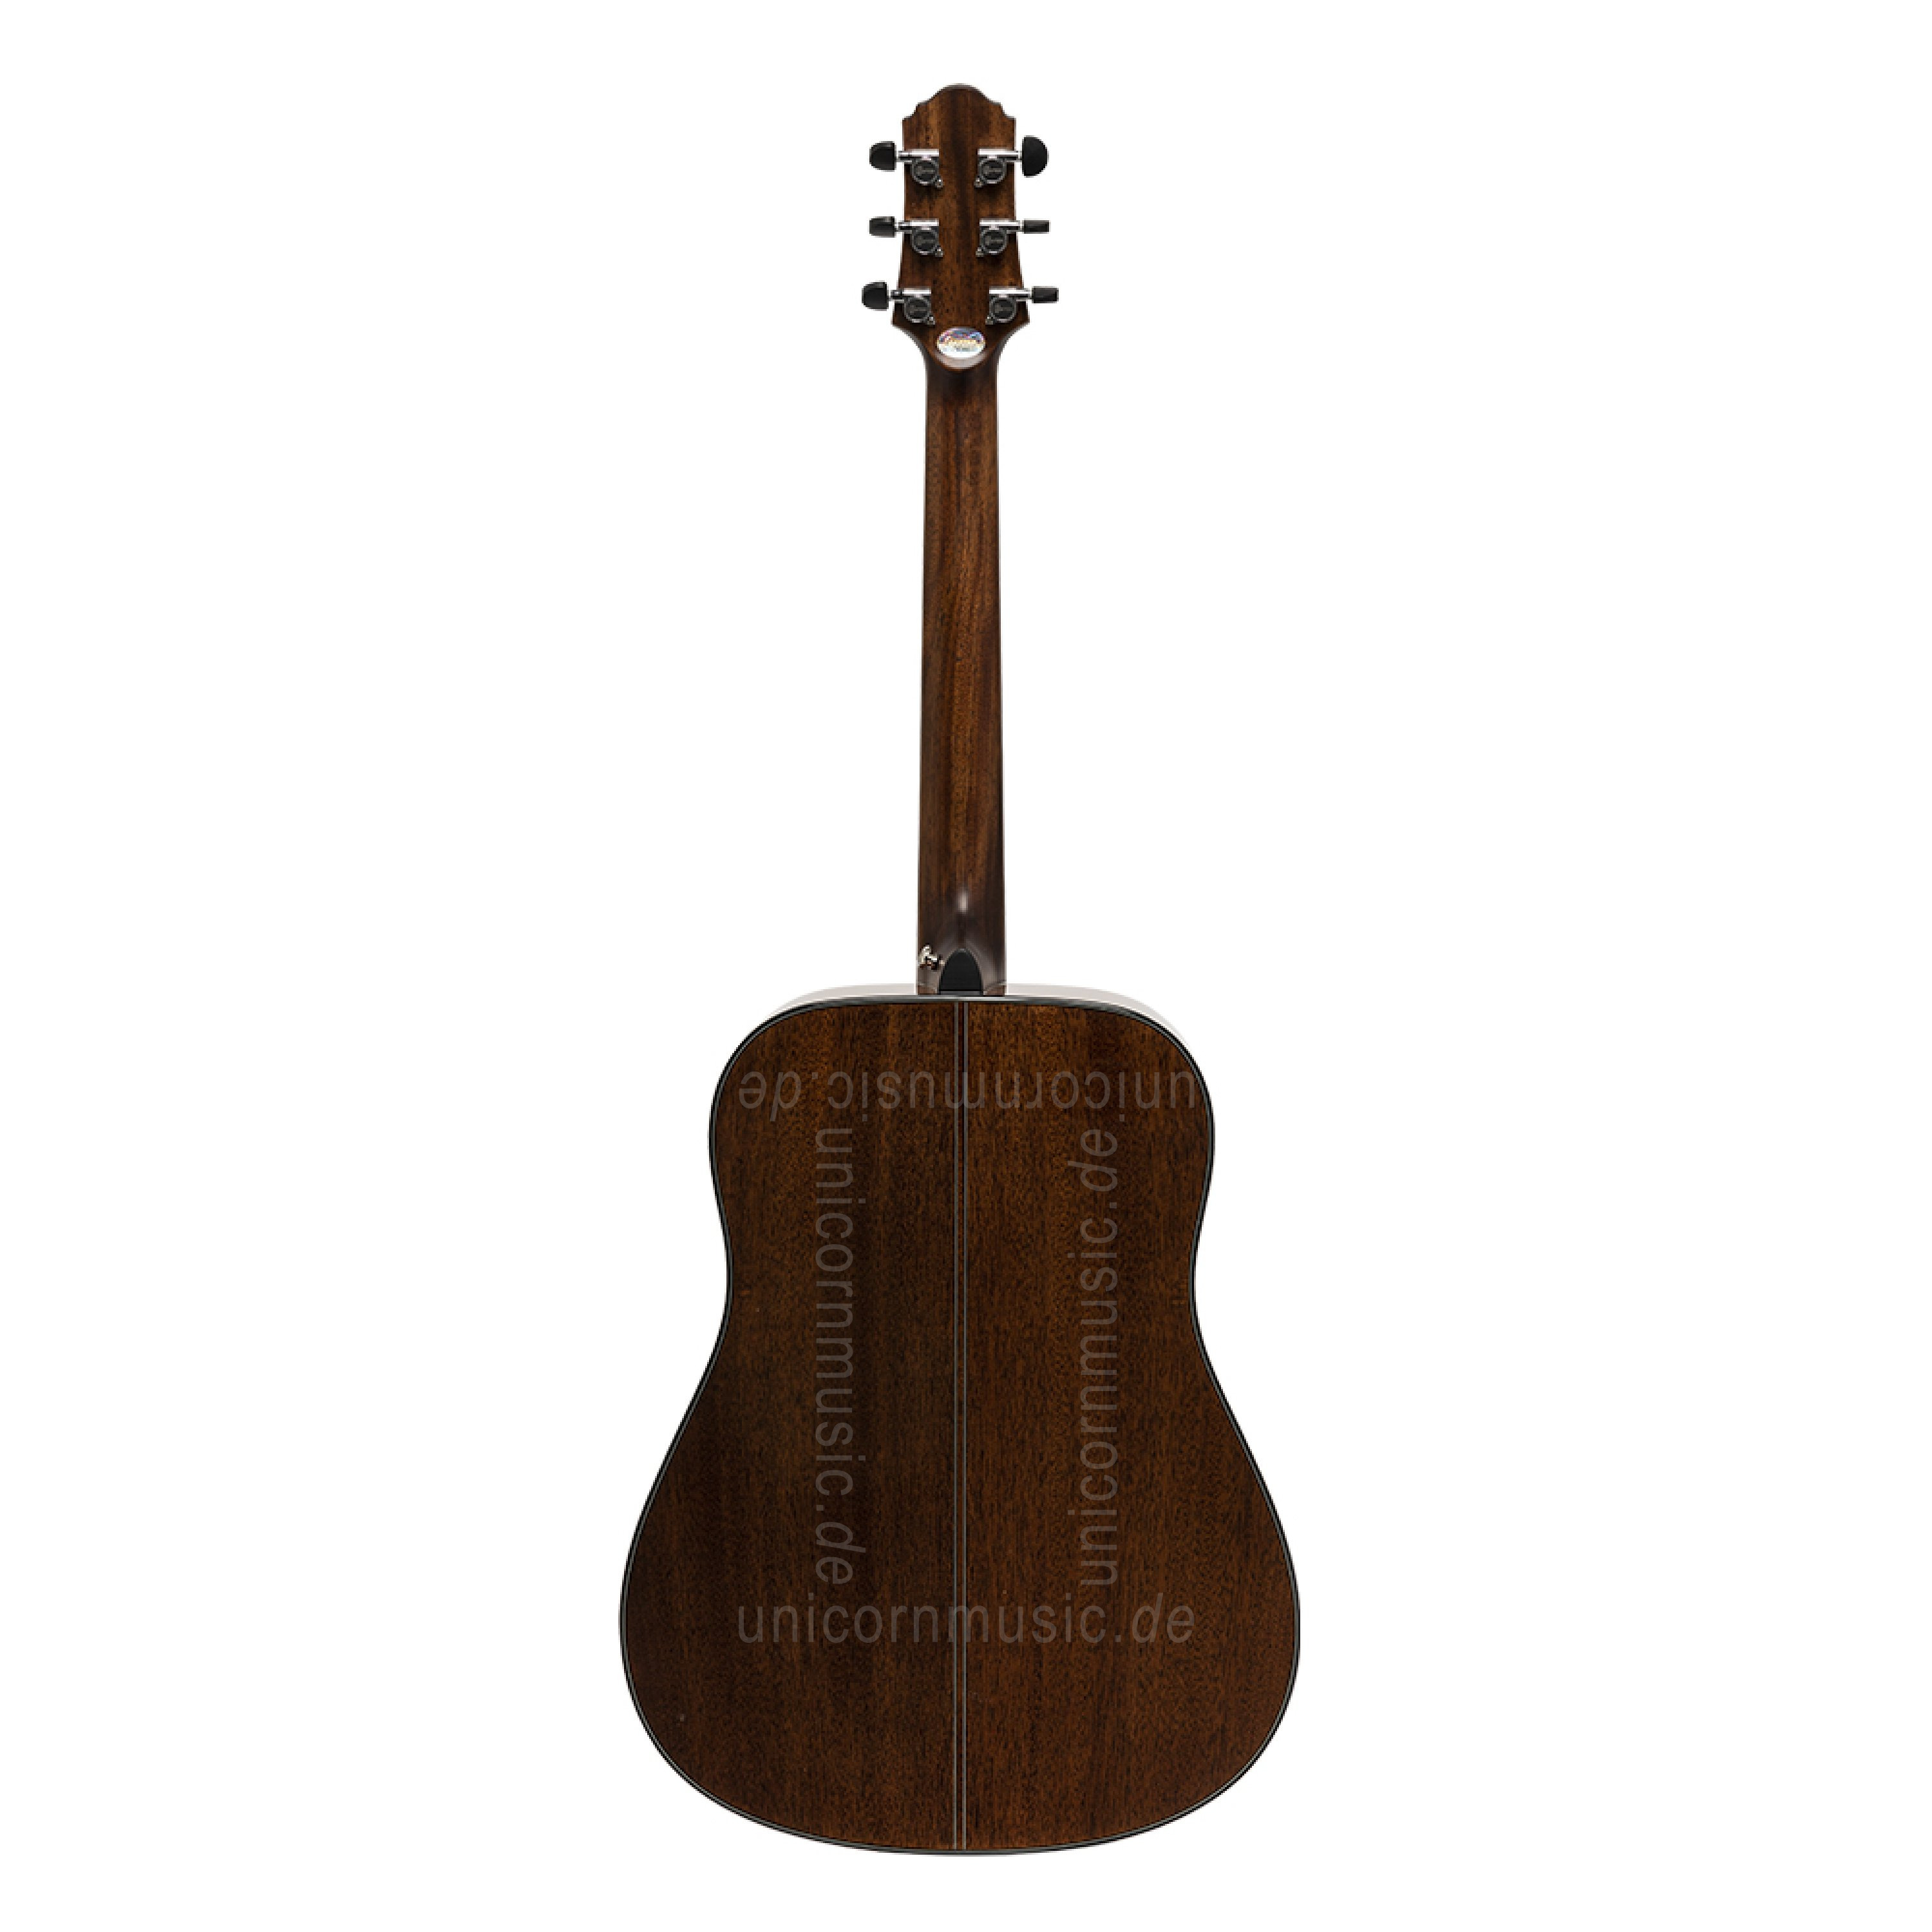 to article description / price Acoustic Guitar - CRAFTER Able D600 N - Dreadnought - solid spruce top